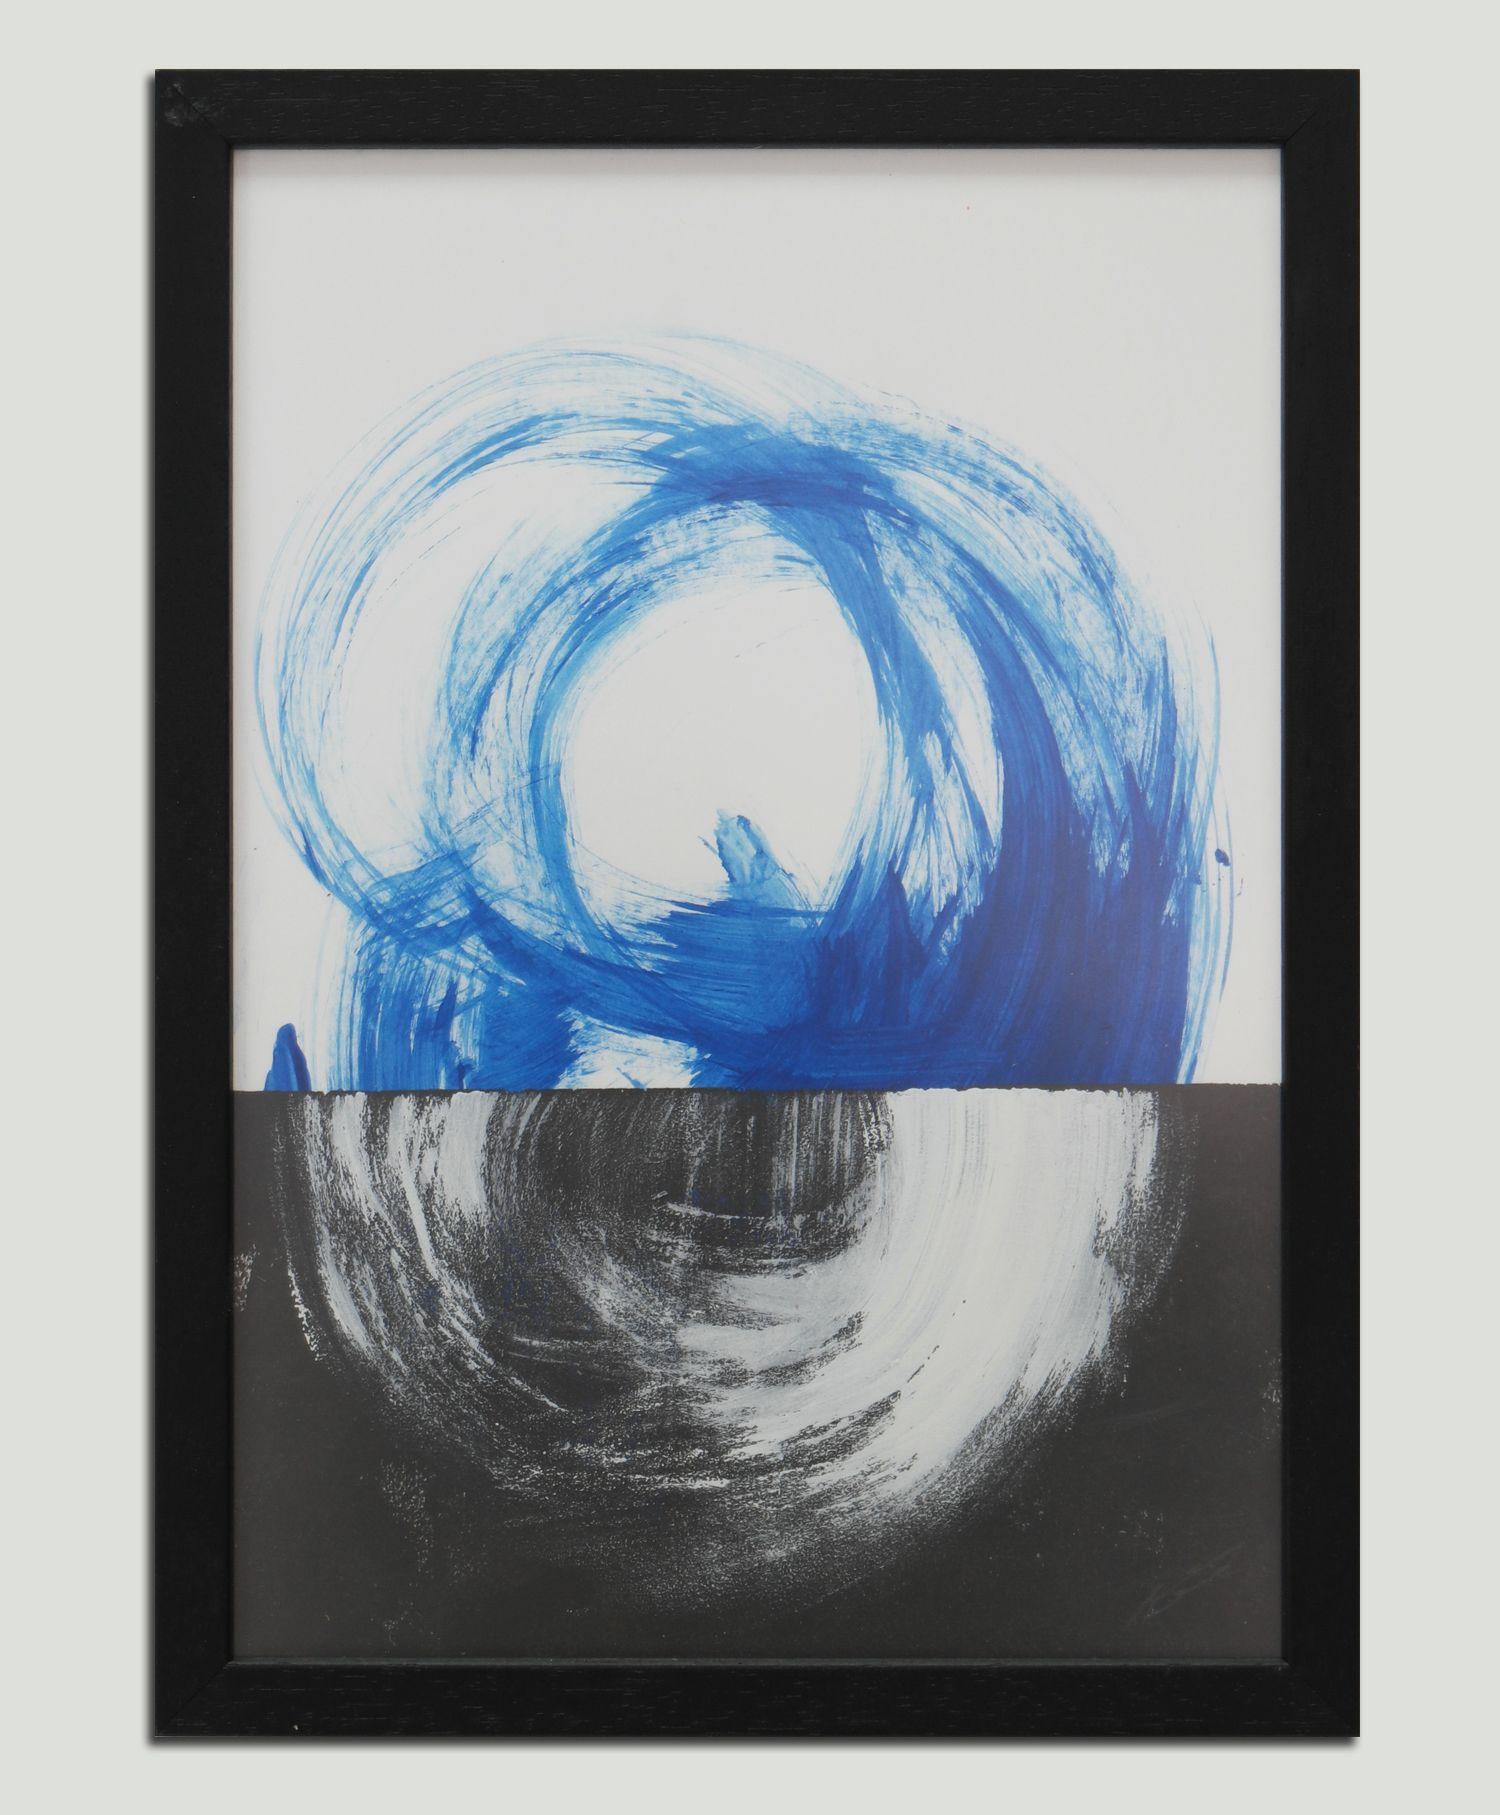 Dreamwave Black- Diptych - Incl Frame, Painting, Acrylic on Paper 1